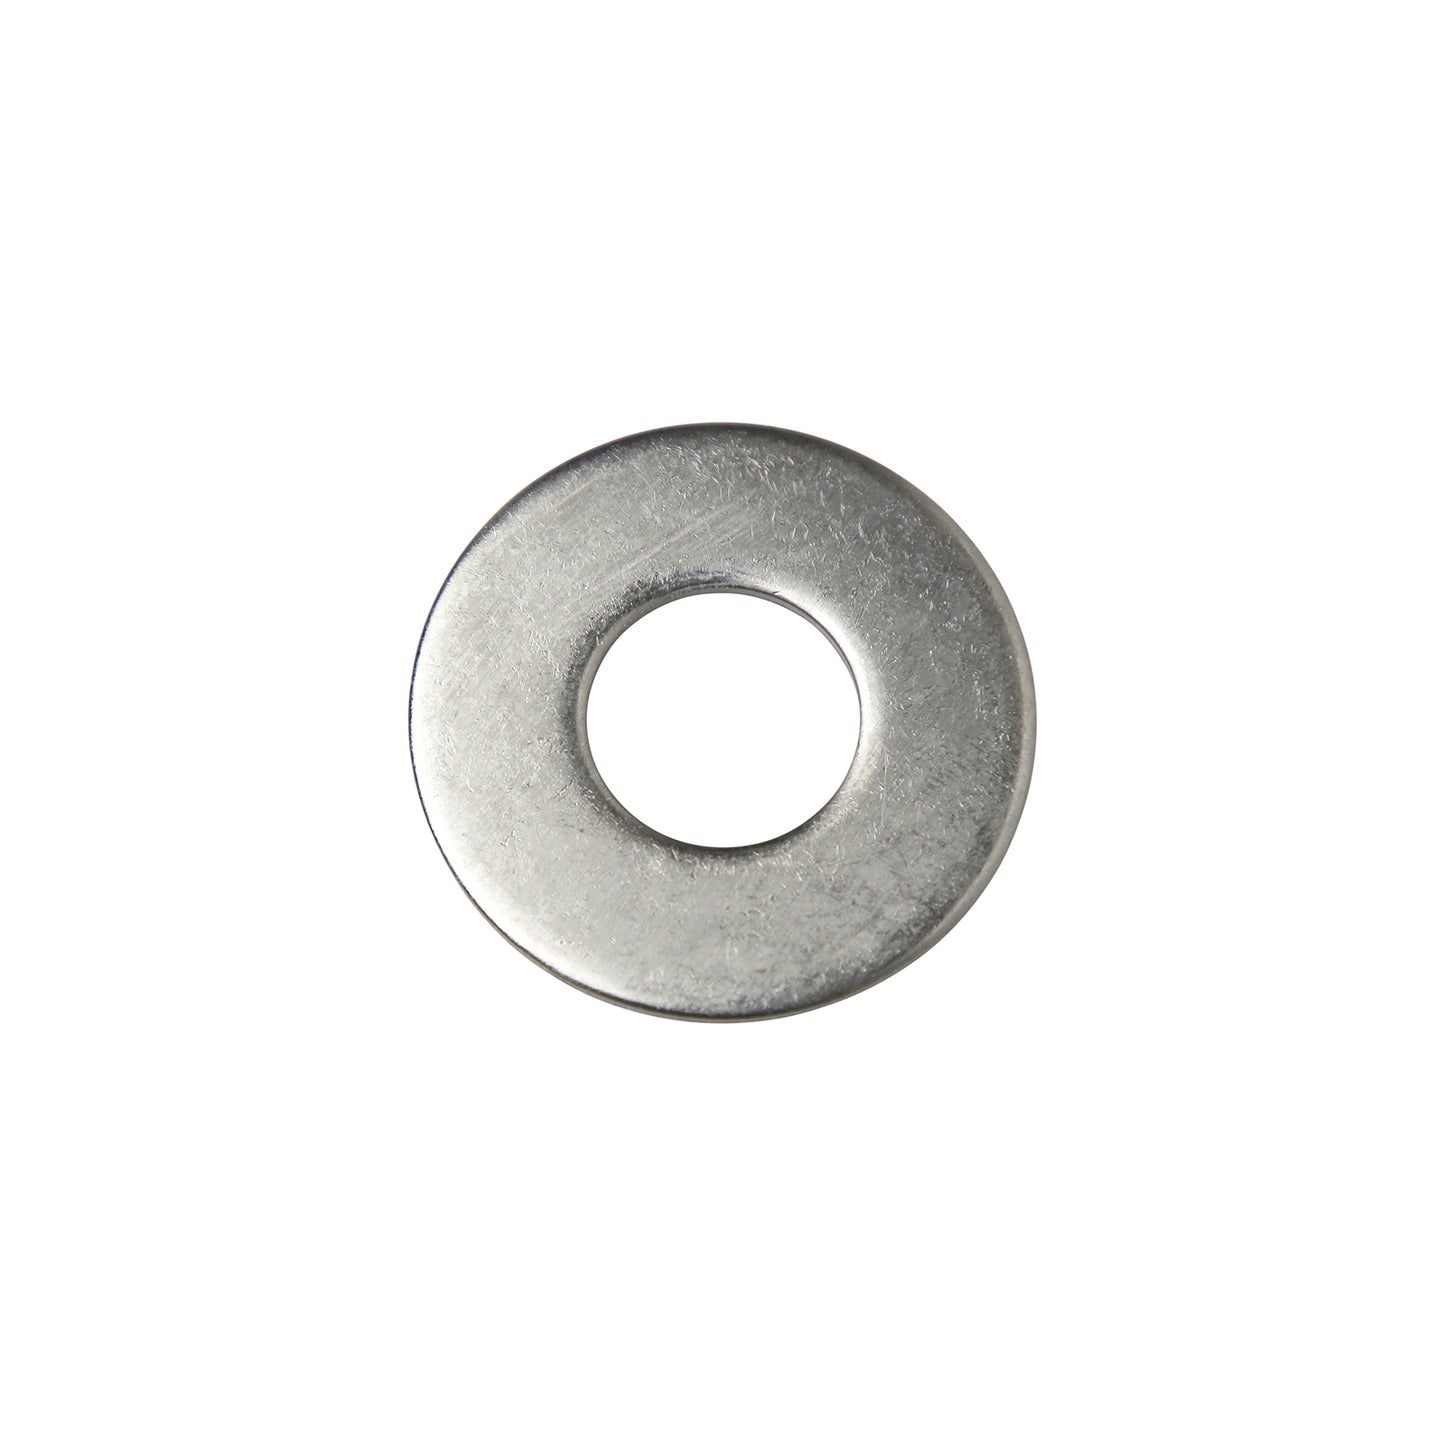 3/4" Conquest USS Flat Washer - 304 Stainless Steel